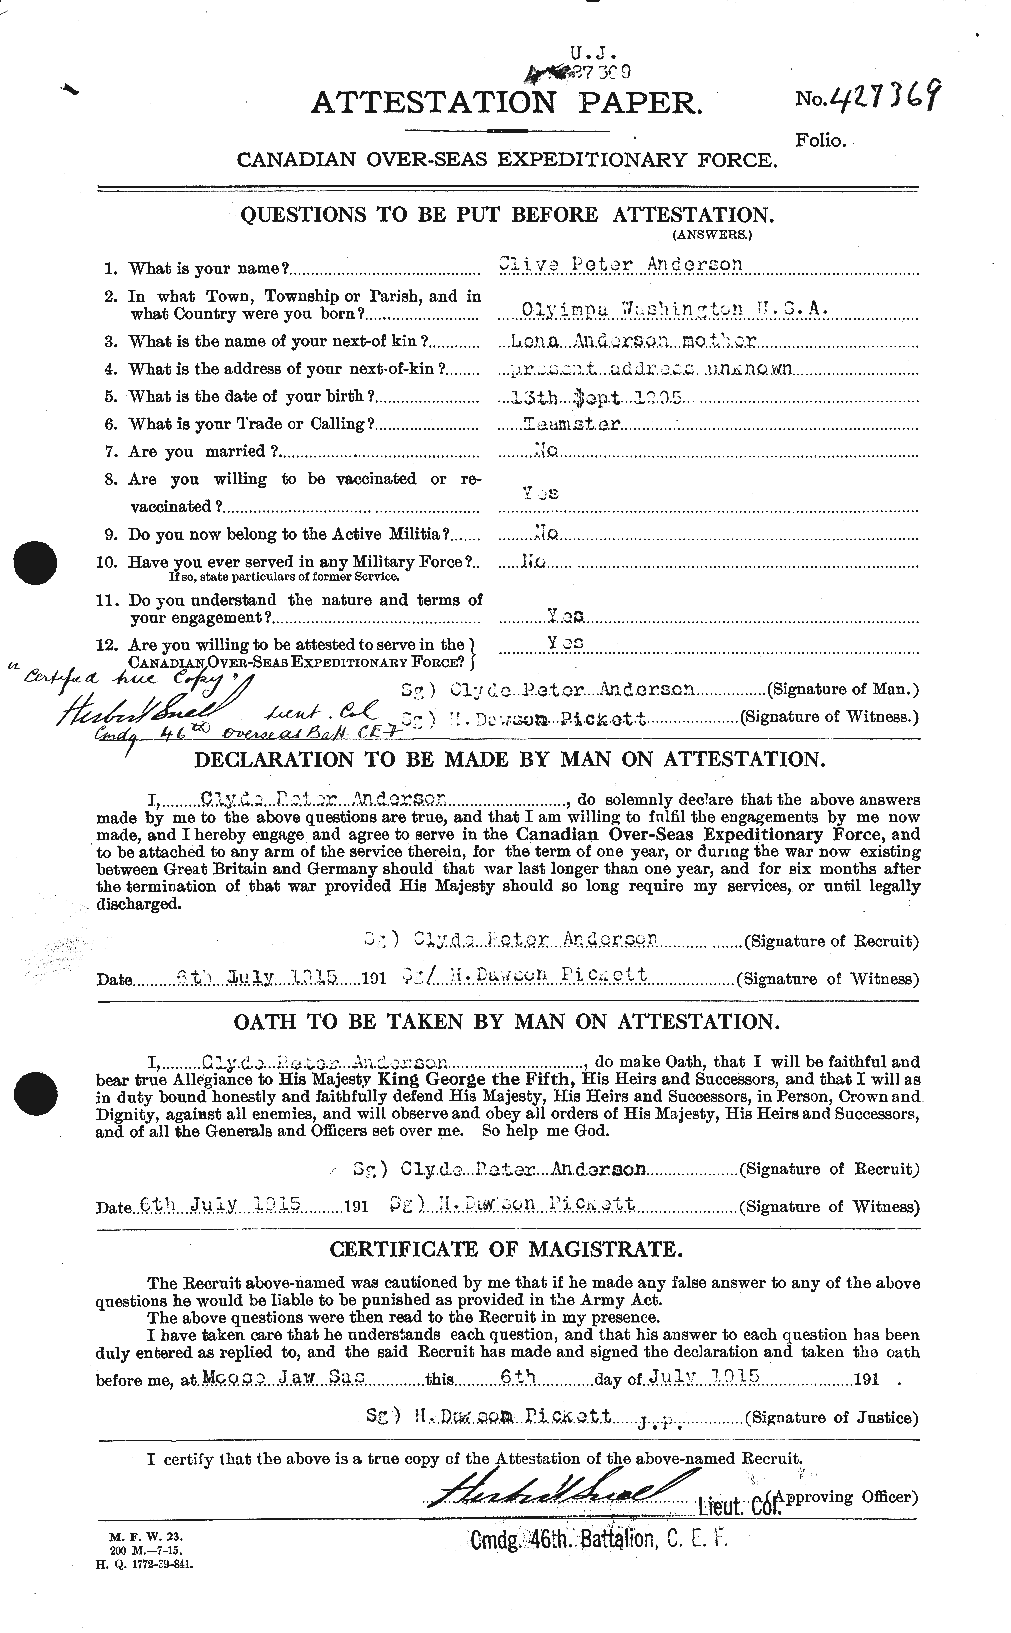 Personnel Records of the First World War - CEF 210057a